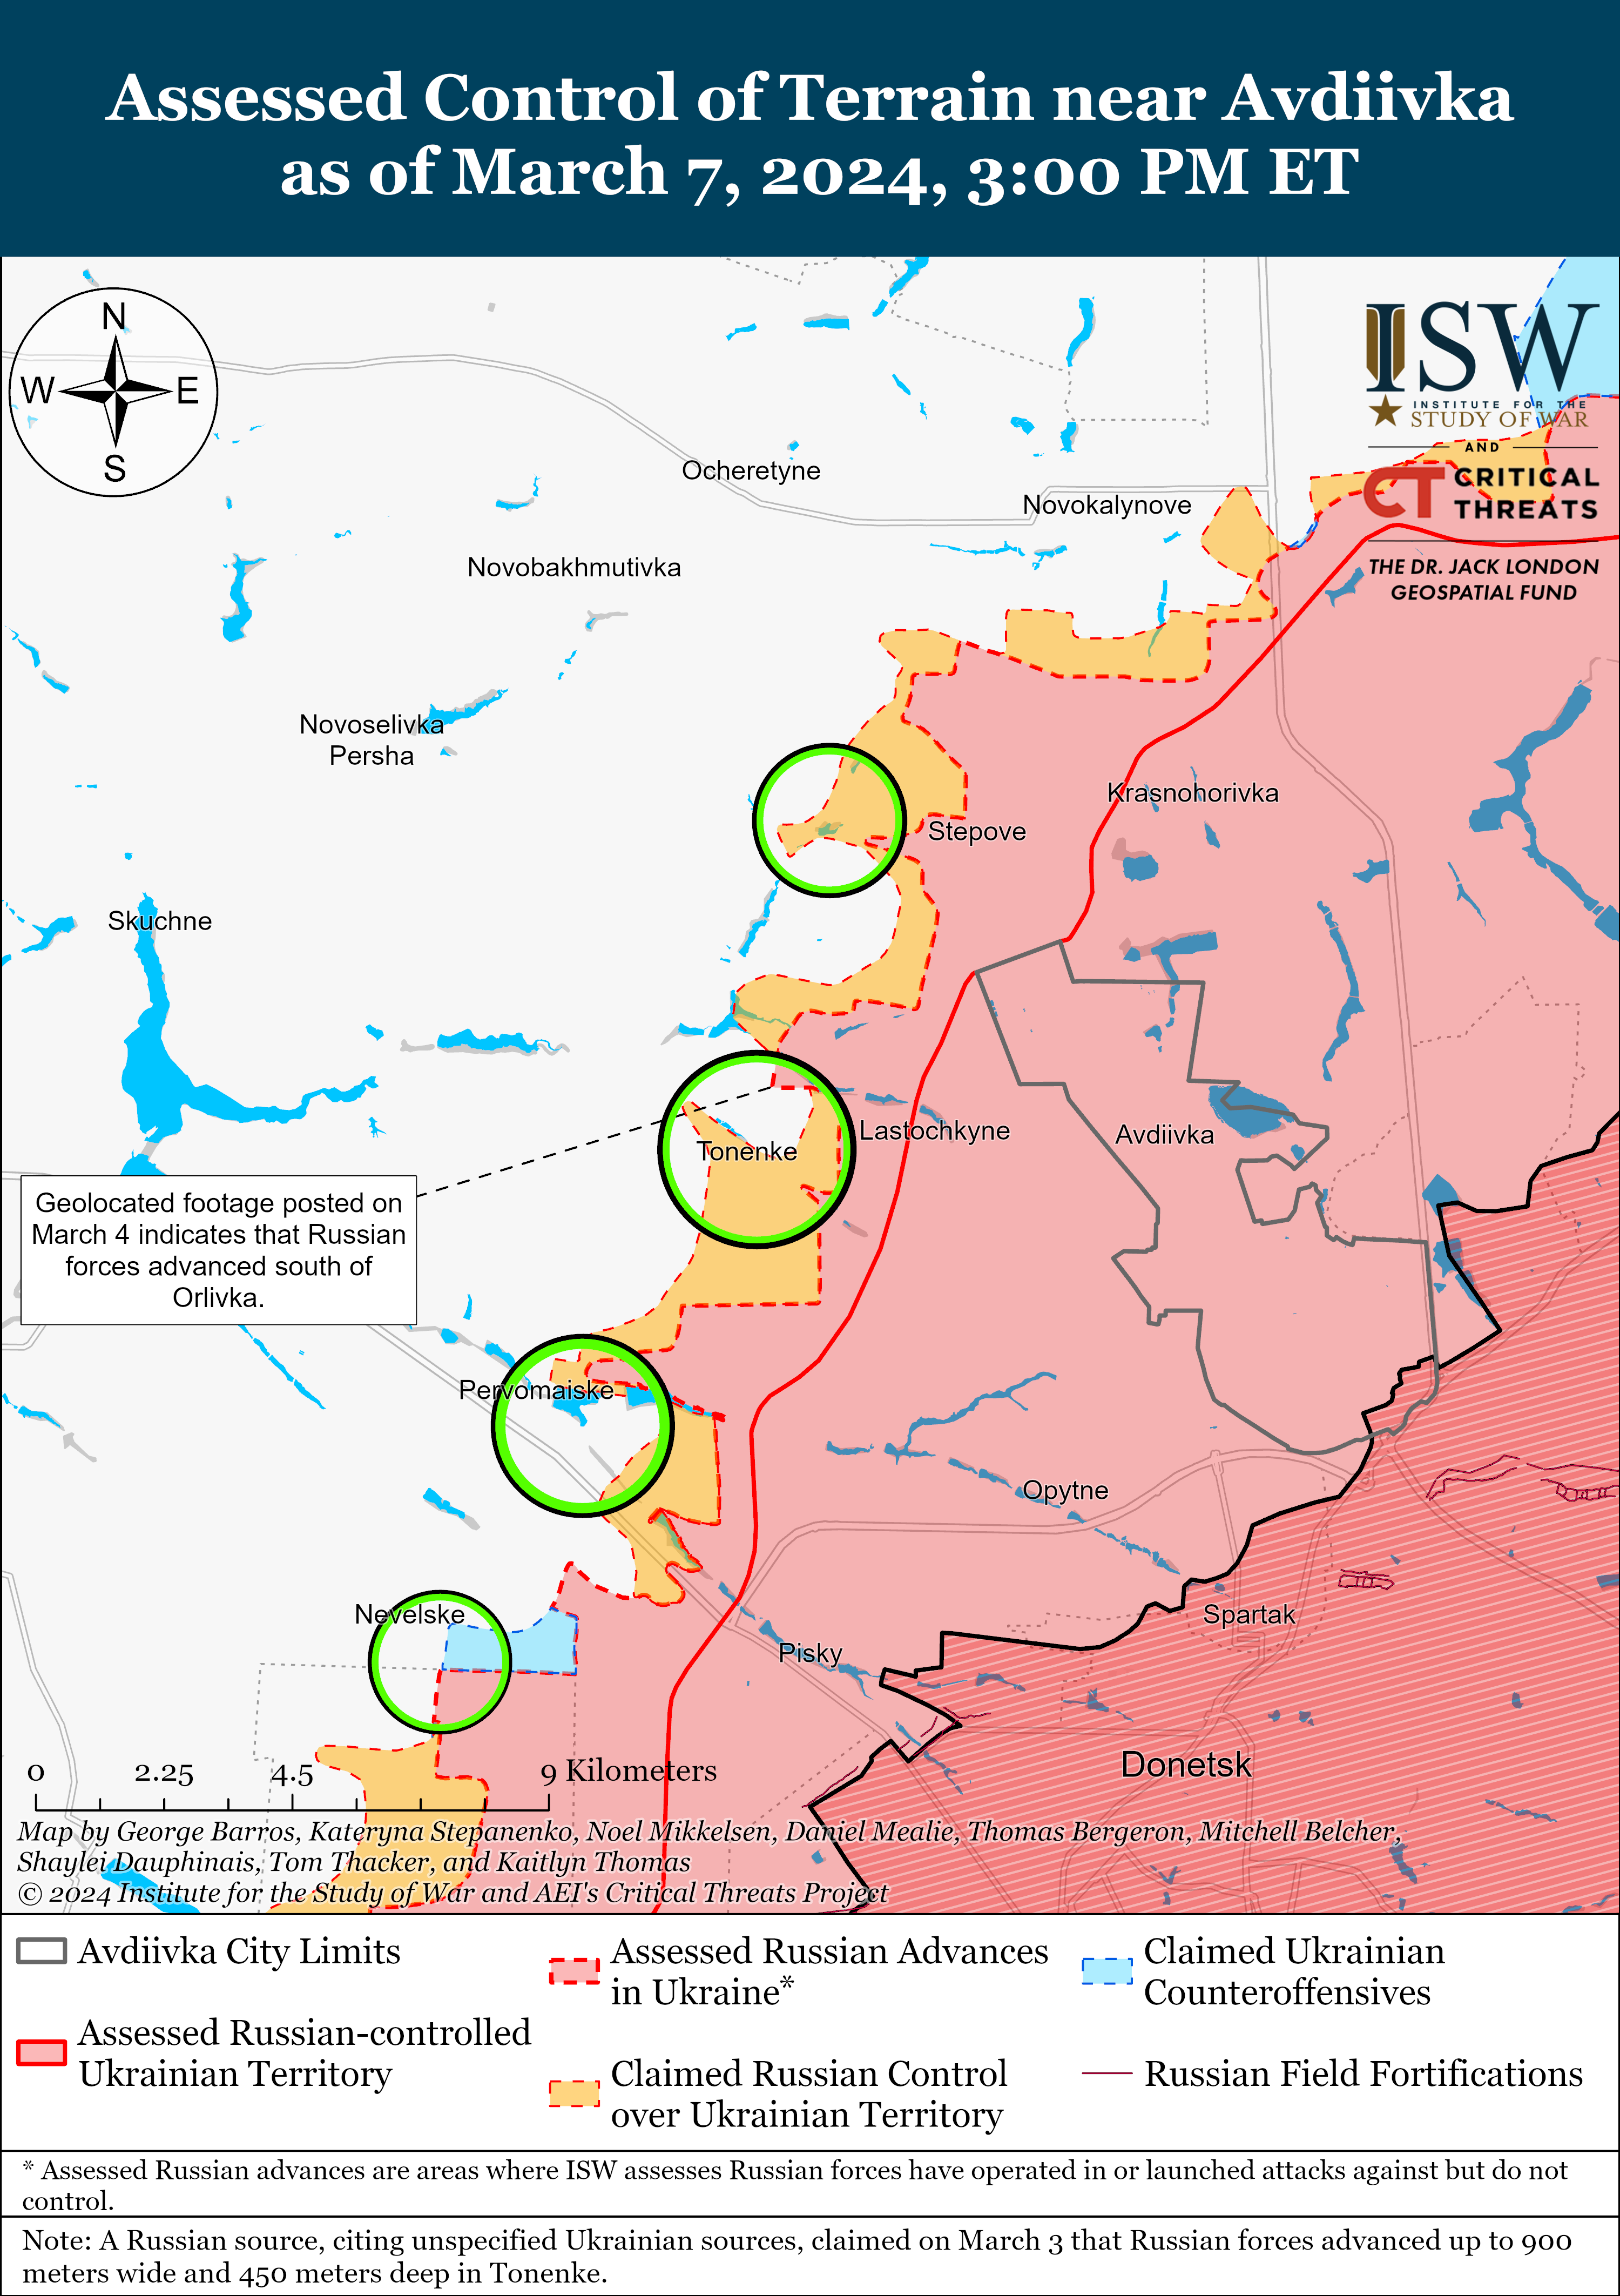 West%20of%20Avdiivka%20Battle%20Map%20Draft%20March%207%2C%202024.png